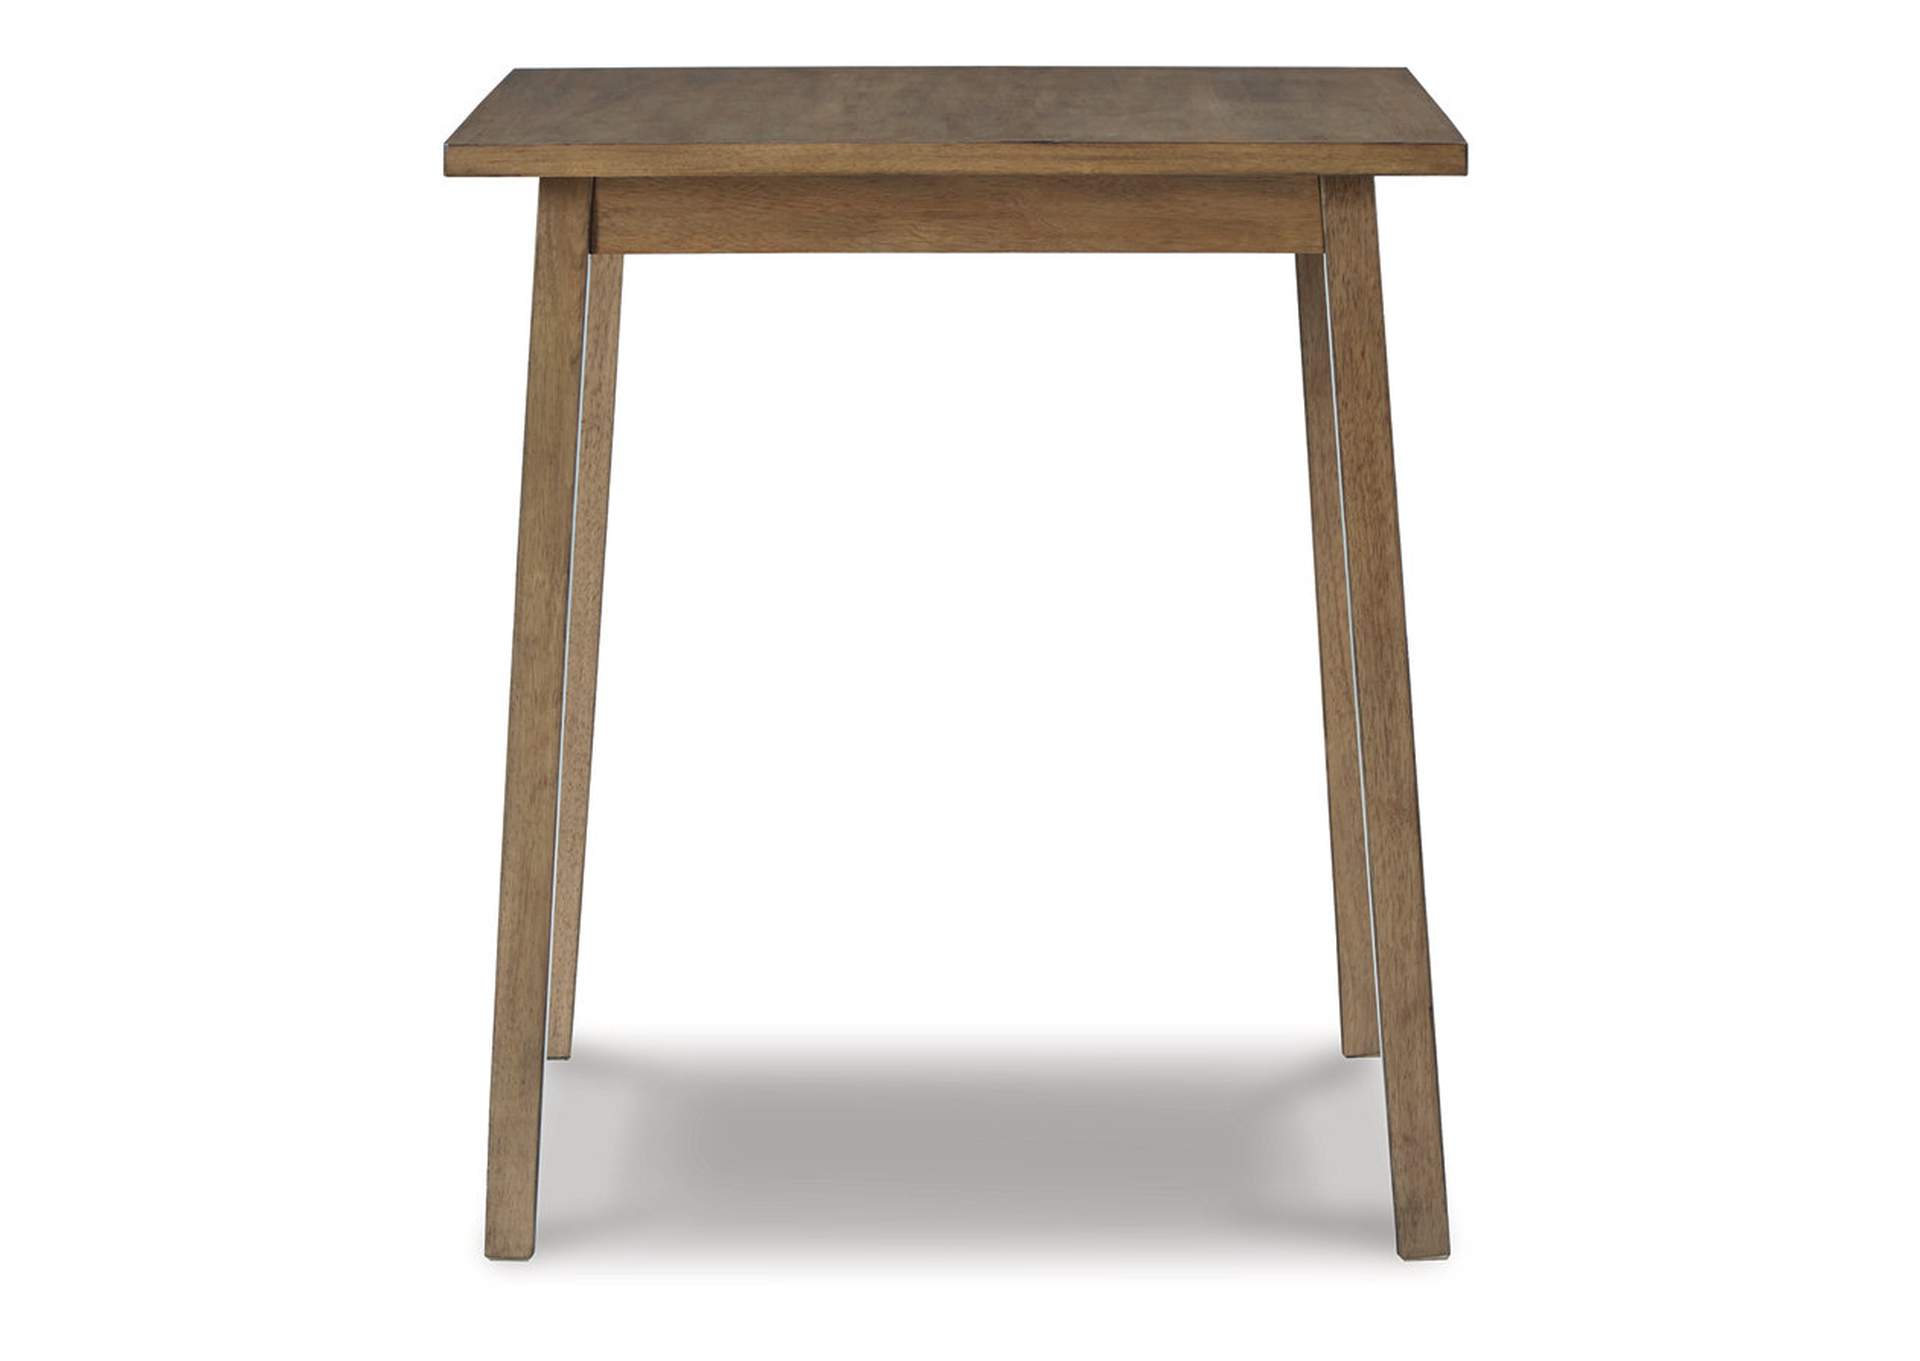 Shully Counter Height Dining Table,Signature Design By Ashley